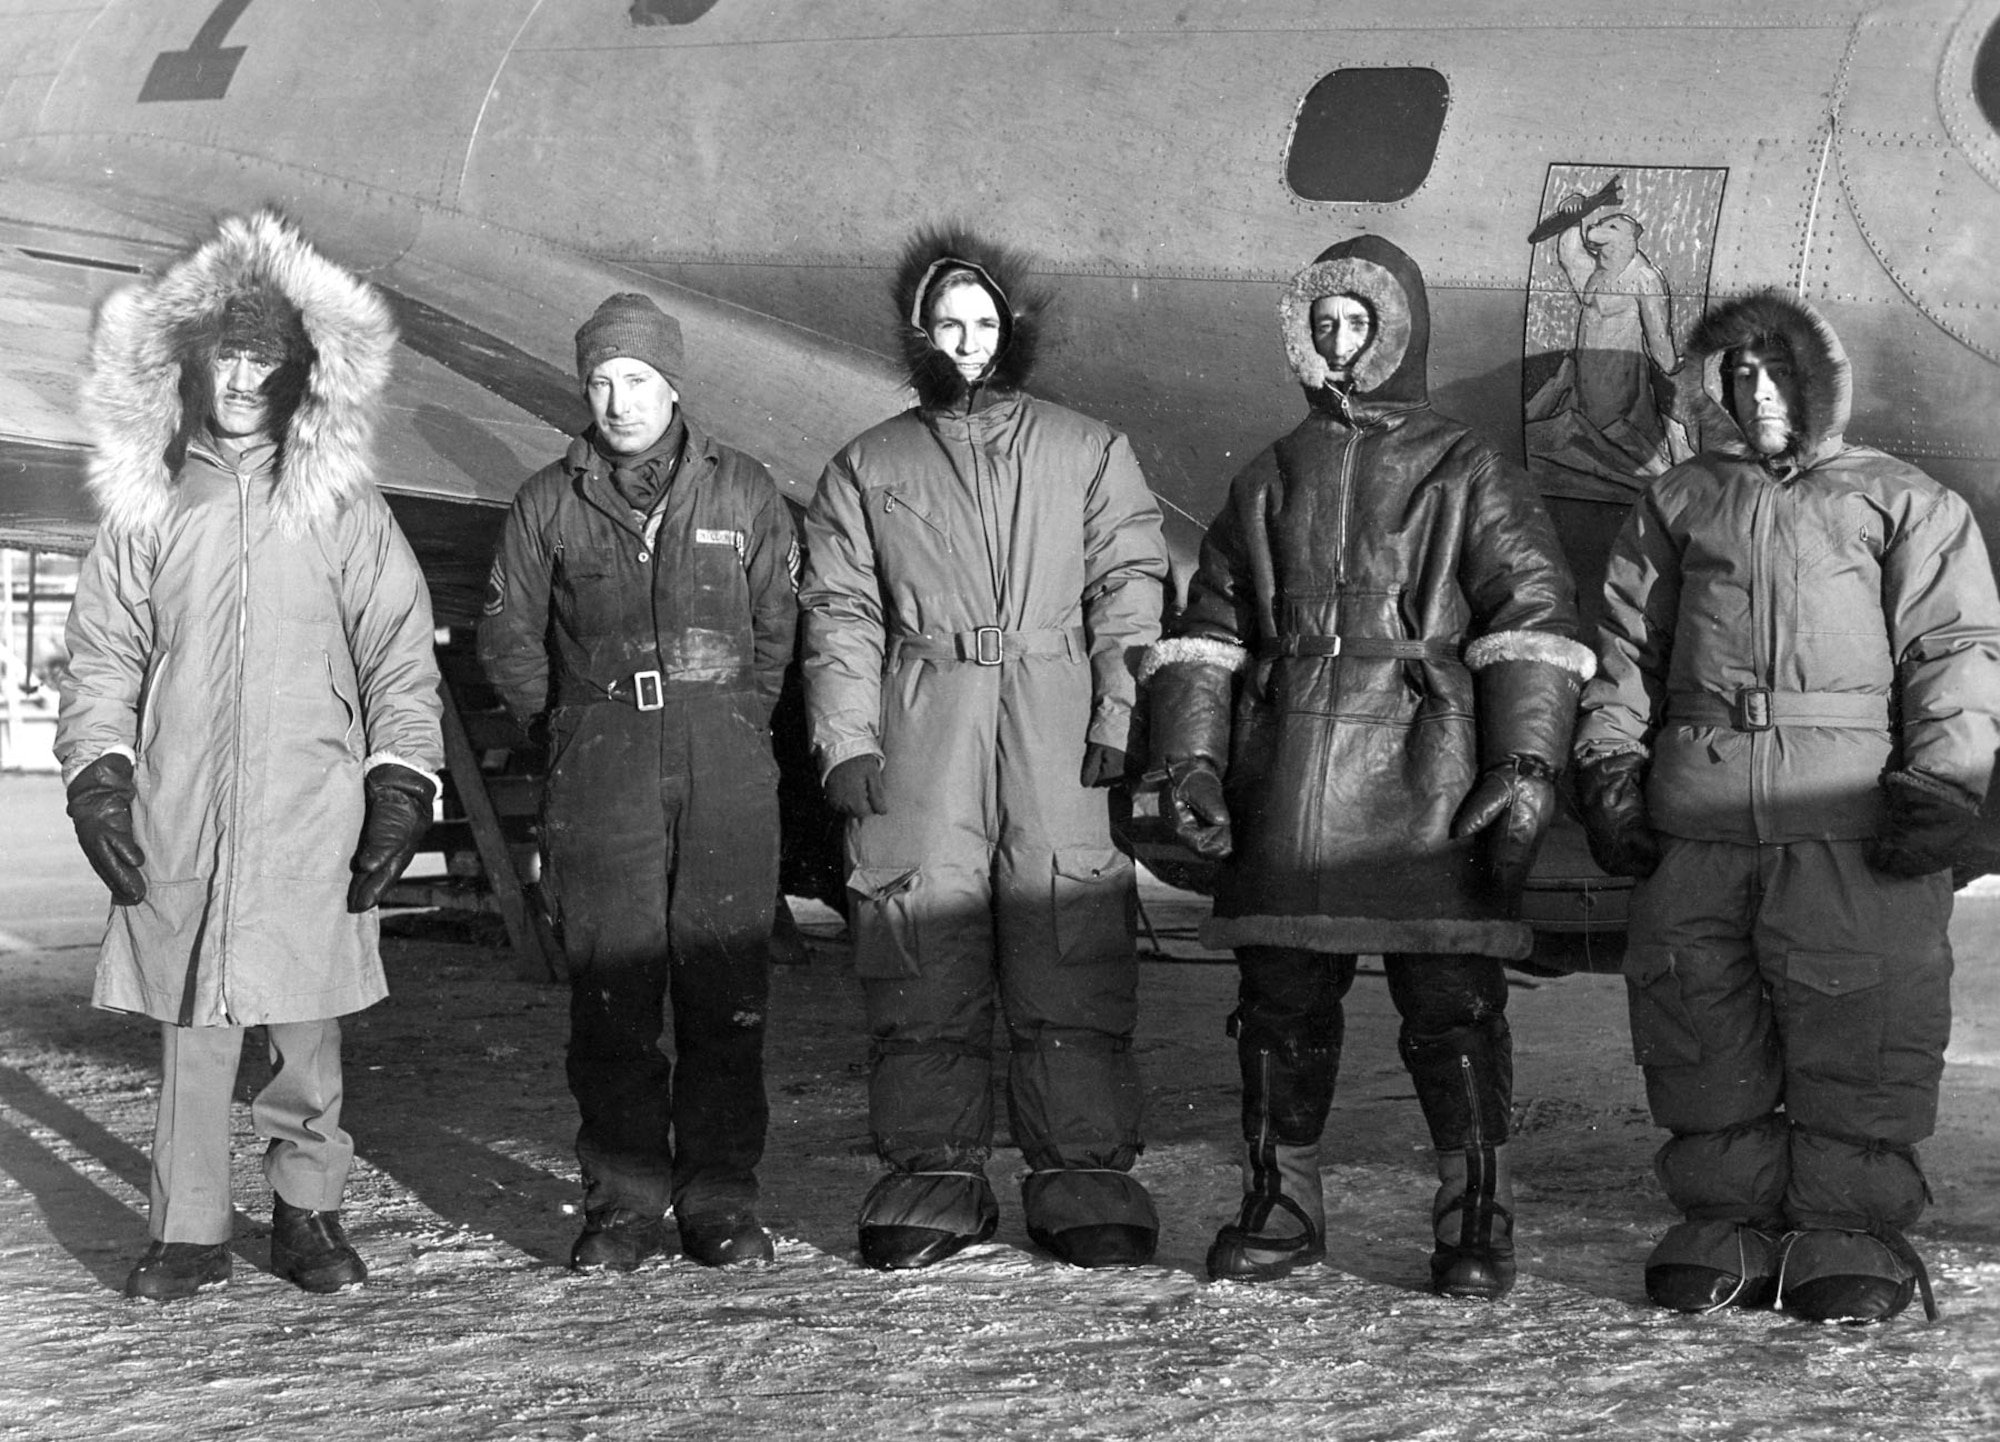 Aircrew testing cold weather flying clothing at Ladd Army Air Field, Alaska, in 1941.  The technical sergeant second from the left is wearing the most common arctic flying uniform early in the war, which in severe conditions would be supplemented with a heavy sheep-shearling jacket and a fur cap. (U.S. Air Force photo)